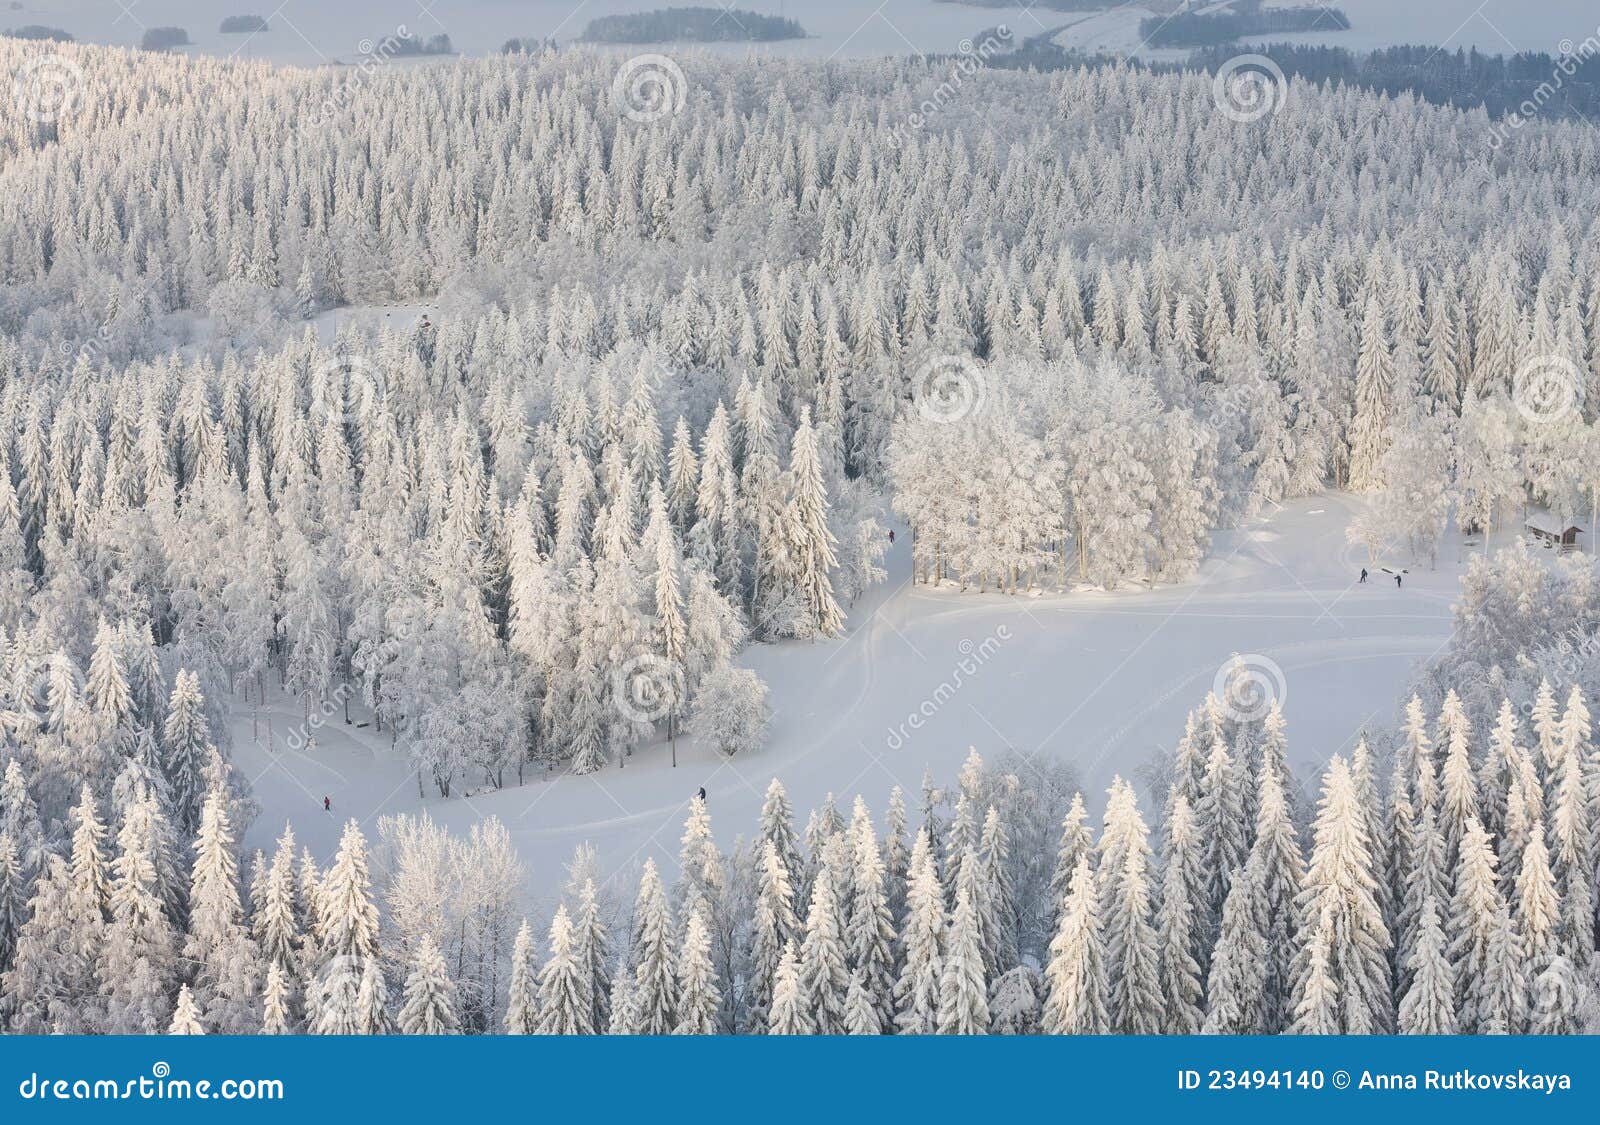 winter lanscape in finland